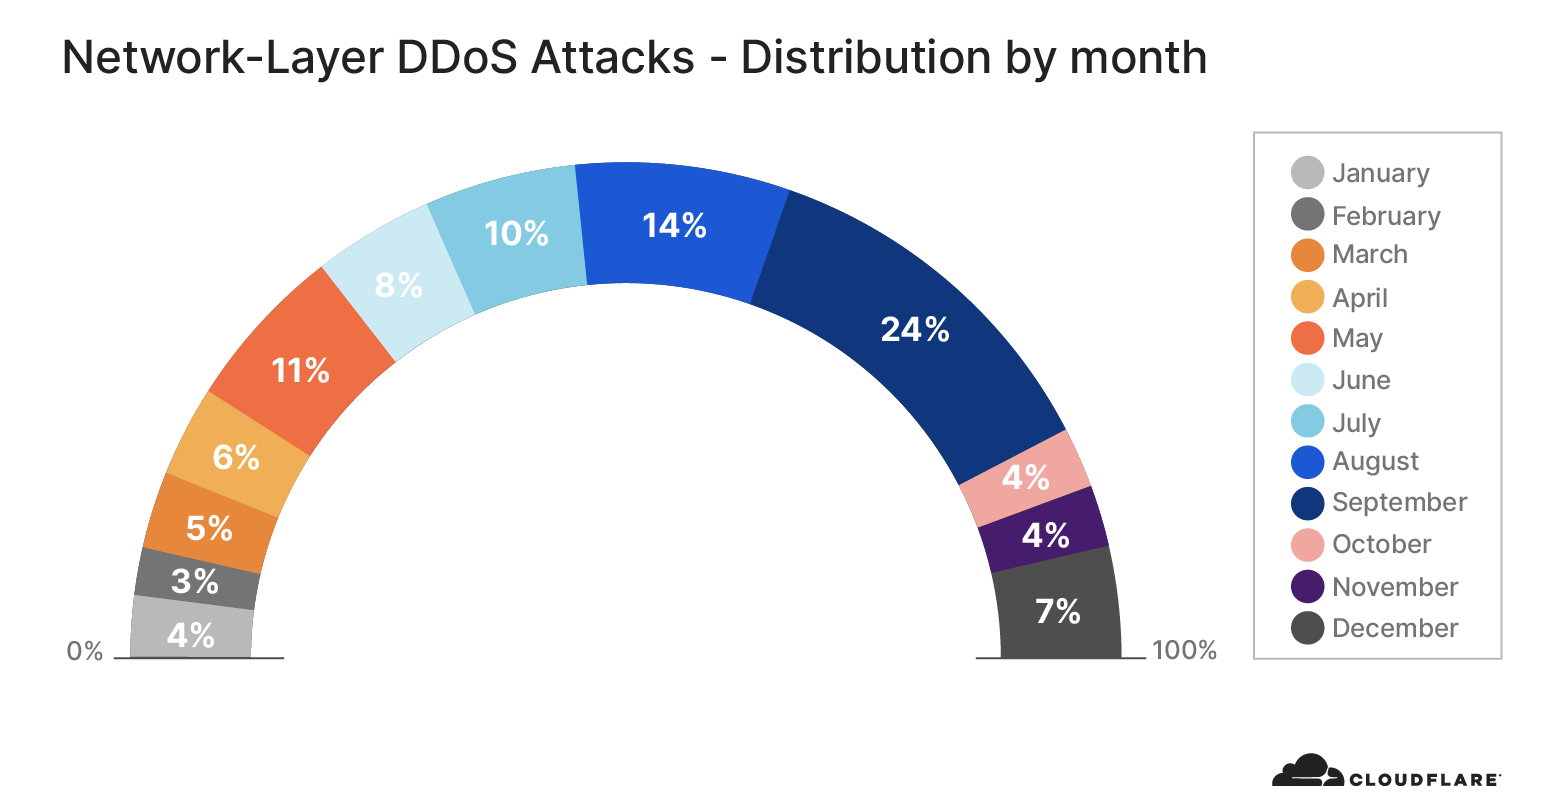 Network Layer Ddos Attack Trends For Q4 2020